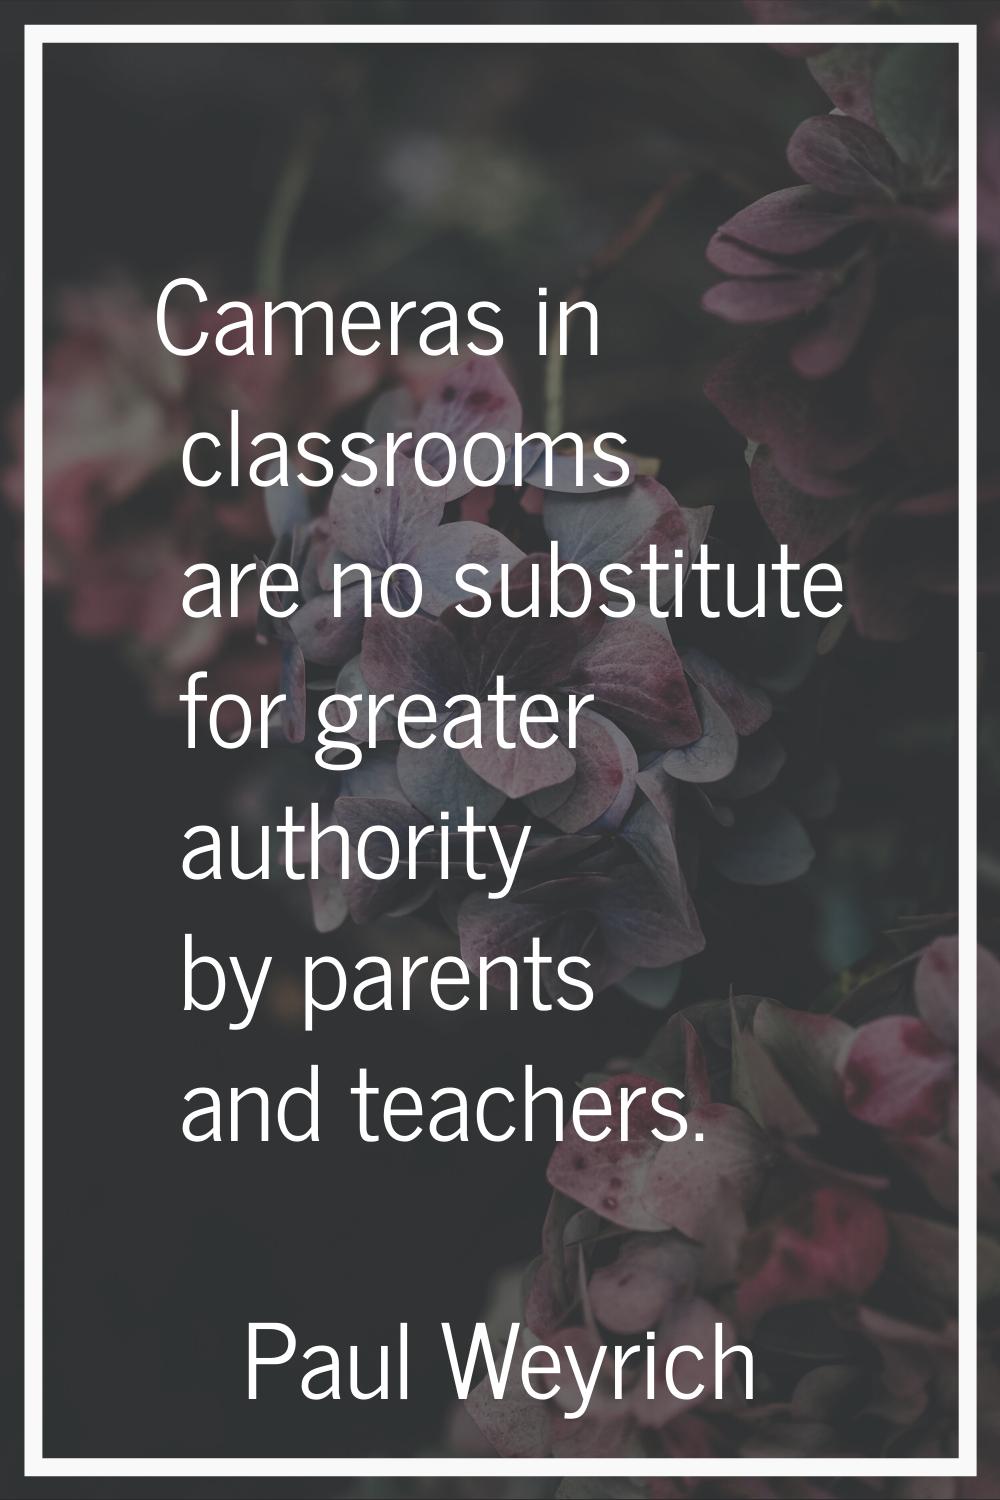 Cameras in classrooms are no substitute for greater authority by parents and teachers.